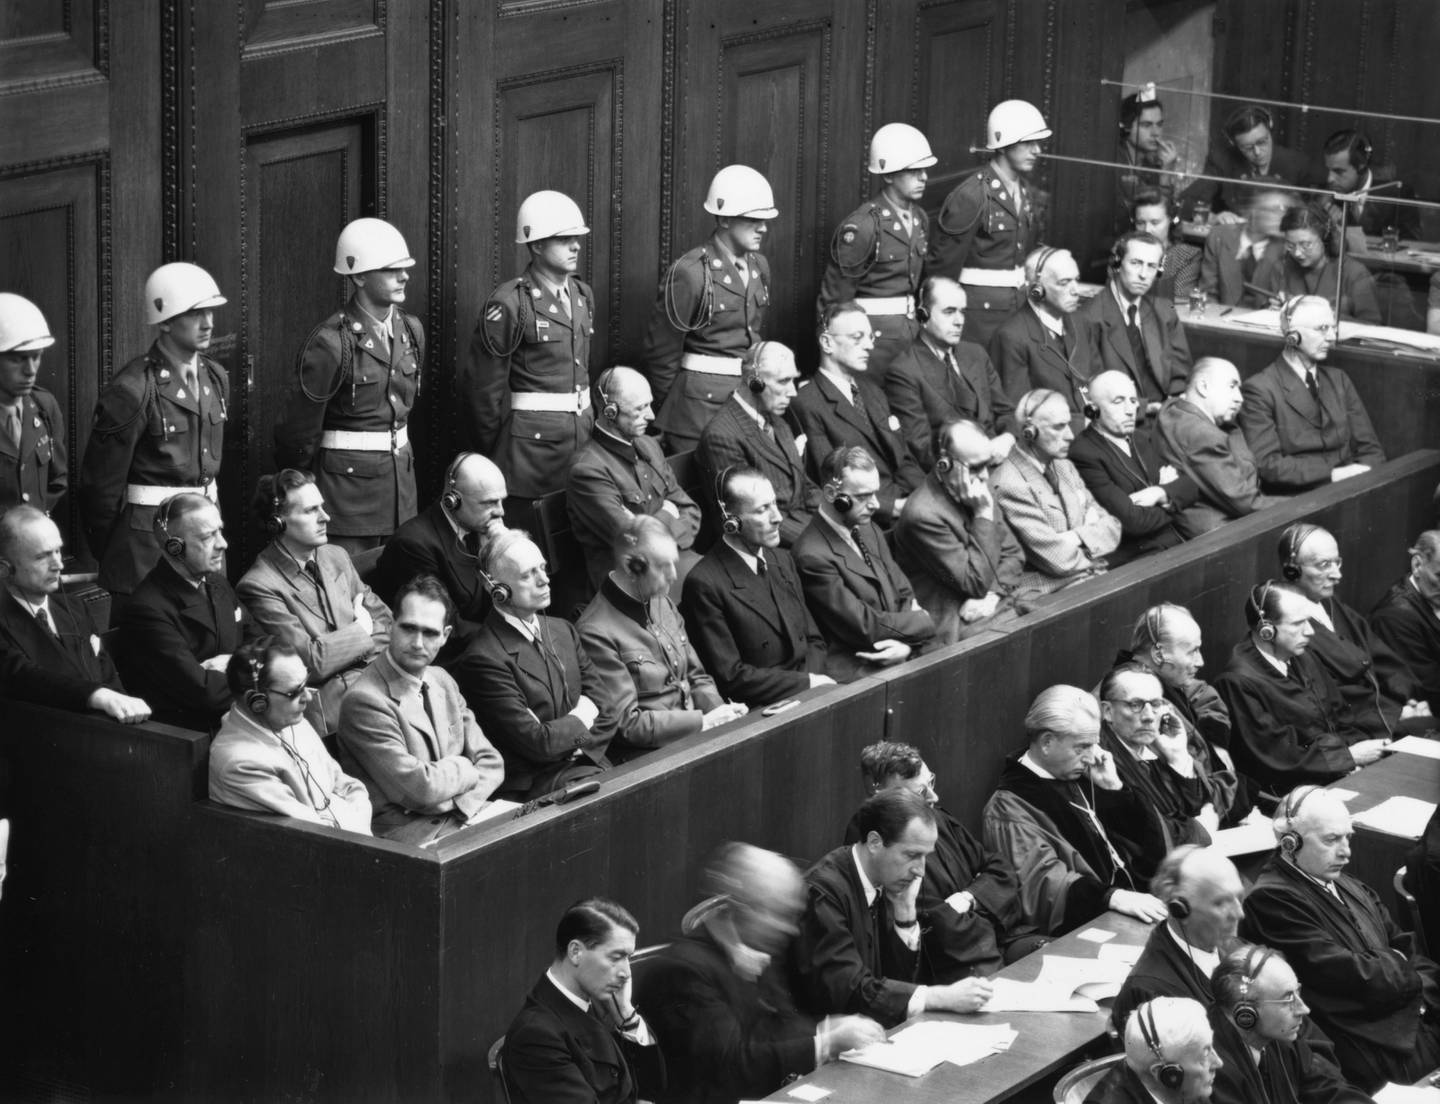 Leading Nazis in the dock in the courtroom at Nuremberg in 1946. Getty Images